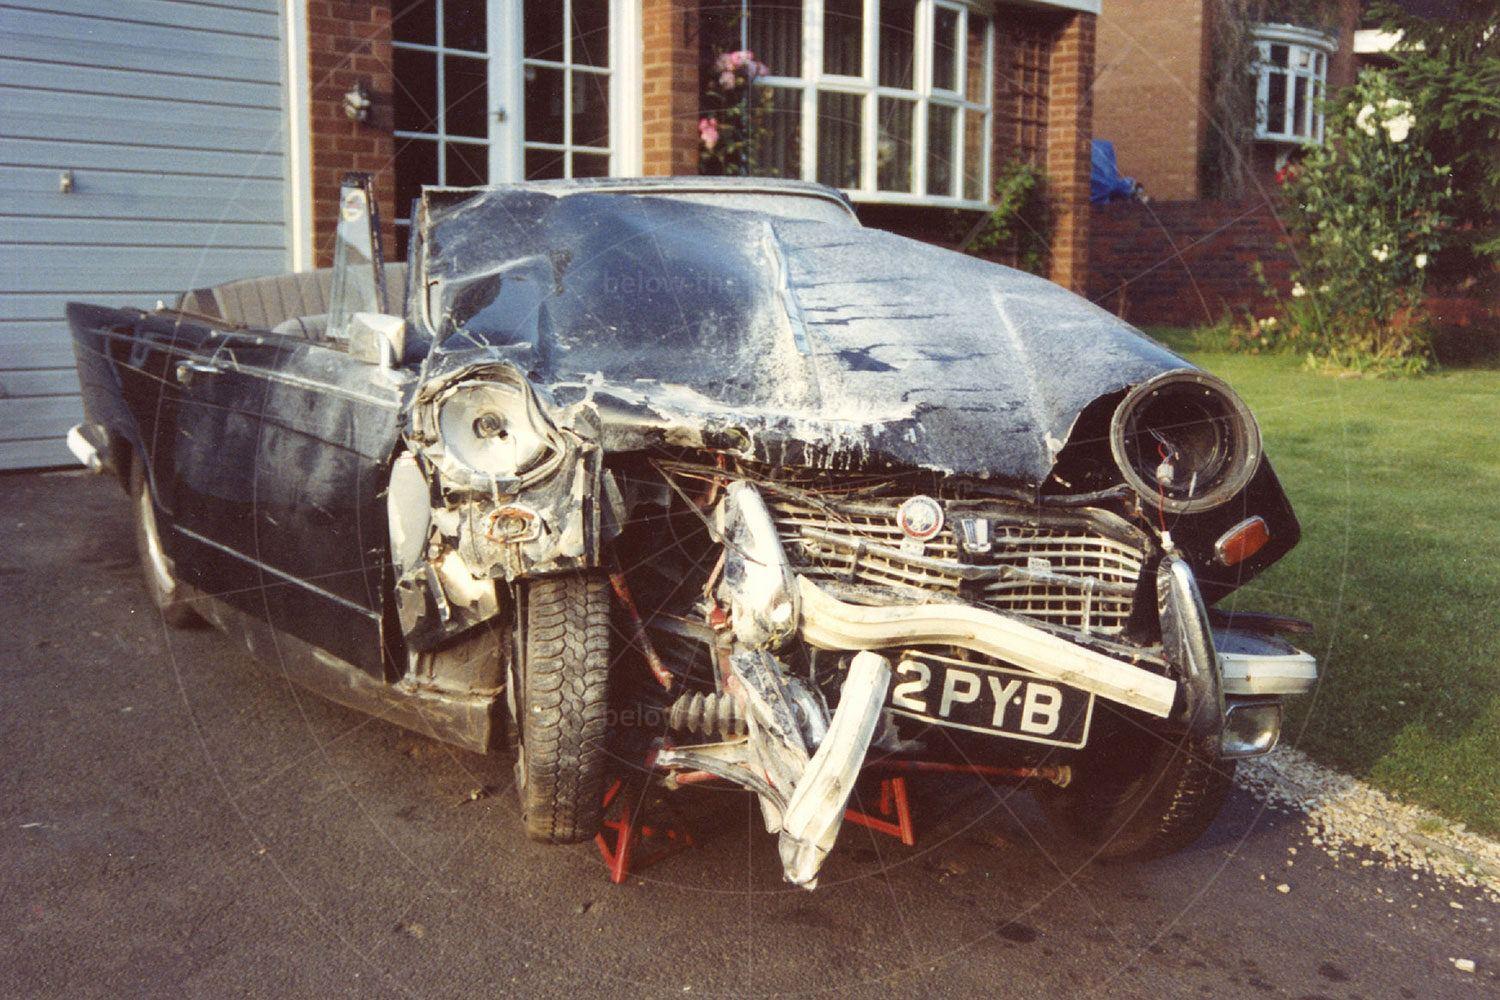 In June 1992 the Herald was destroyed in a crash Pic: magiccarpics.co.uk | In June 1992 the Herald was destroyed in a crash